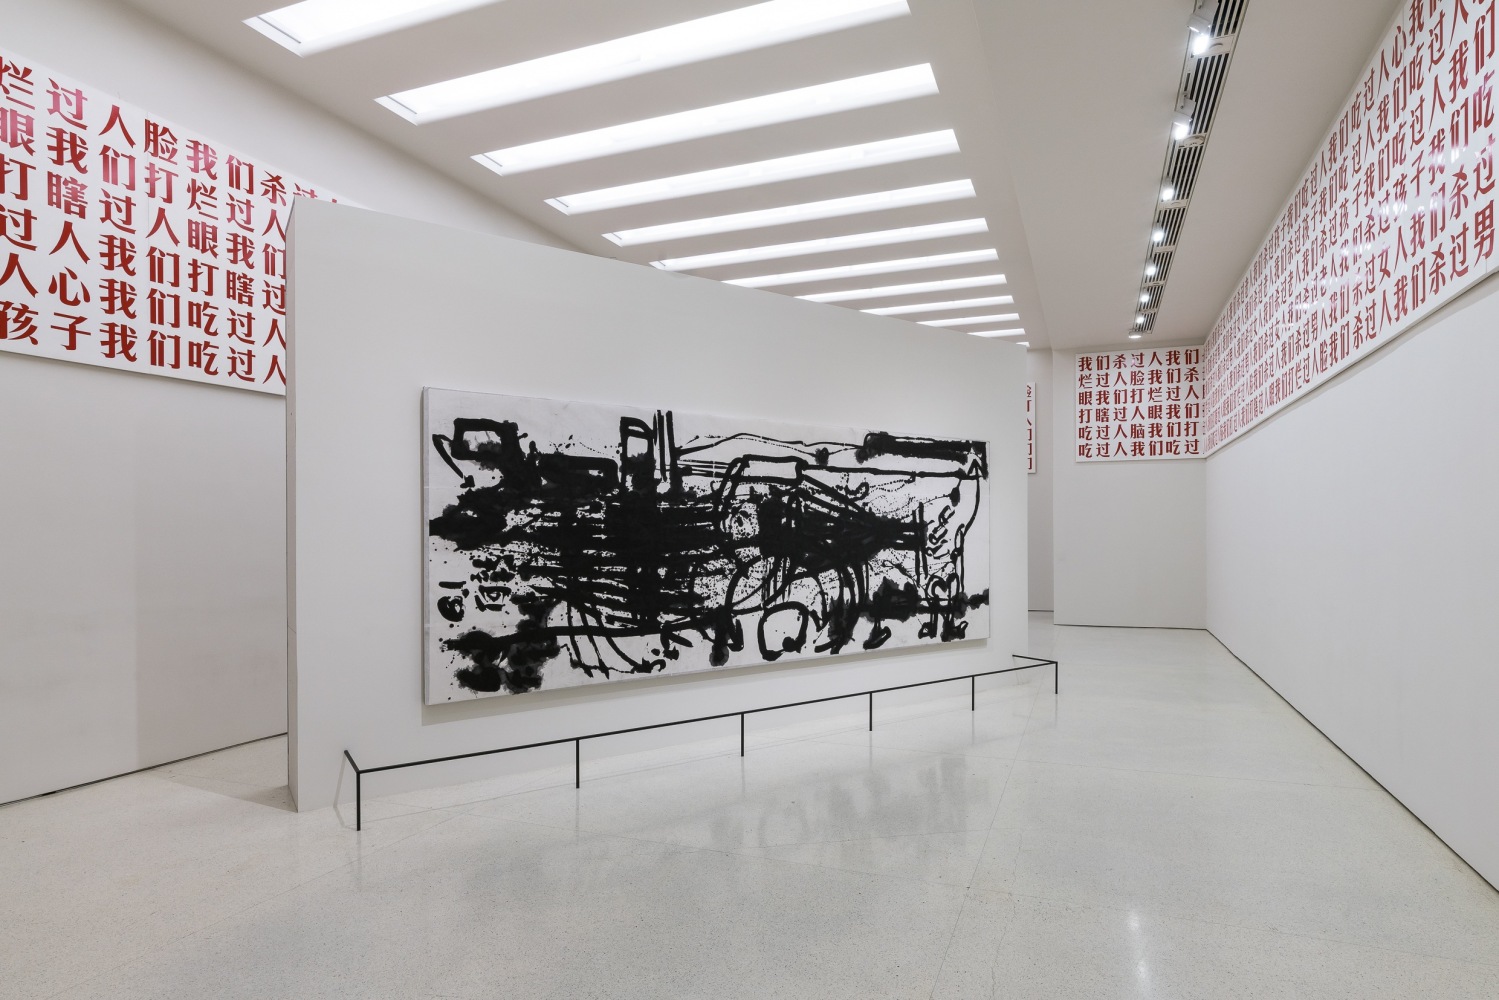 Installation view:&amp;nbsp;Art and China after 1989: Theater of the World, Solomon R. Guggenheim Museum, New York, October 6, 2017&amp;ndash;January 7, 2018
Photo: David Heald &amp;copy; Solomon R. Guggenheim Foundation, 2017